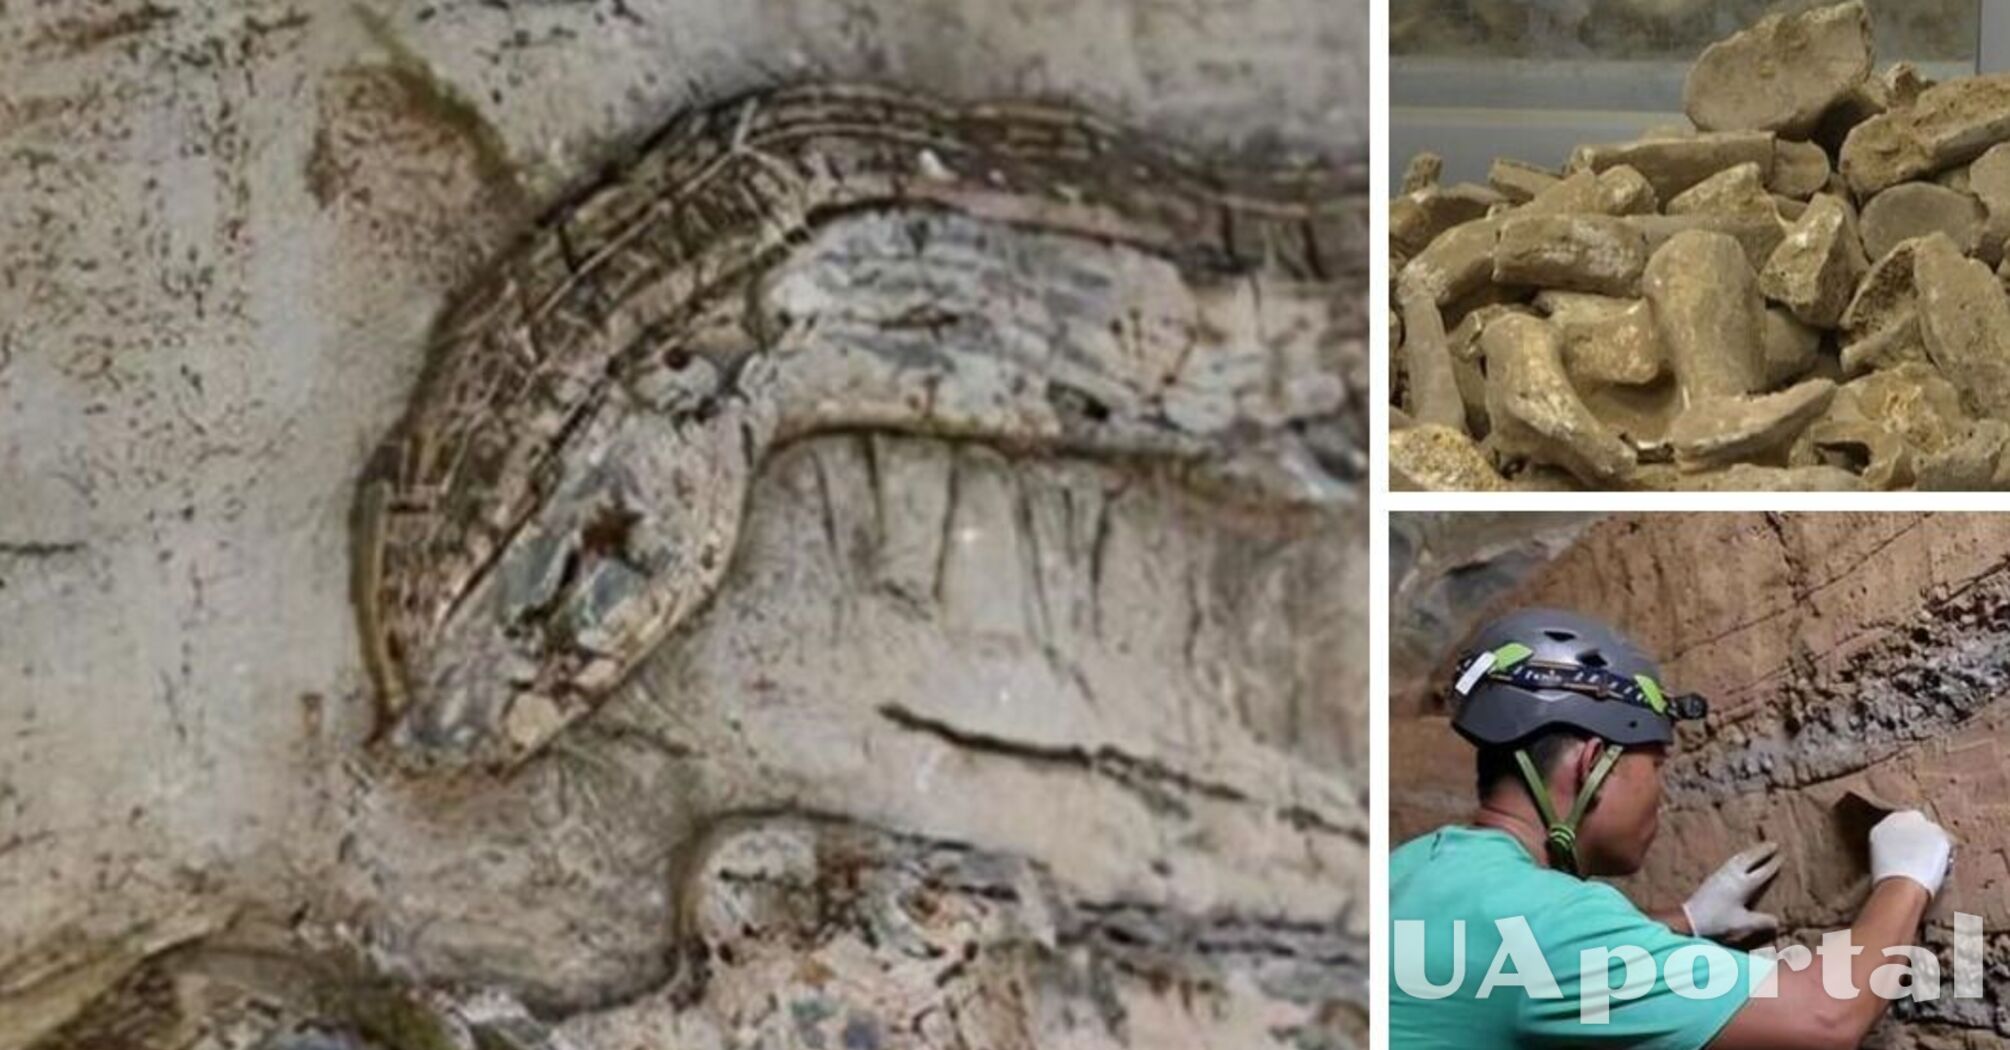 Fossils of 6,000-year-old prehistoric snakes discovered in China (photo)